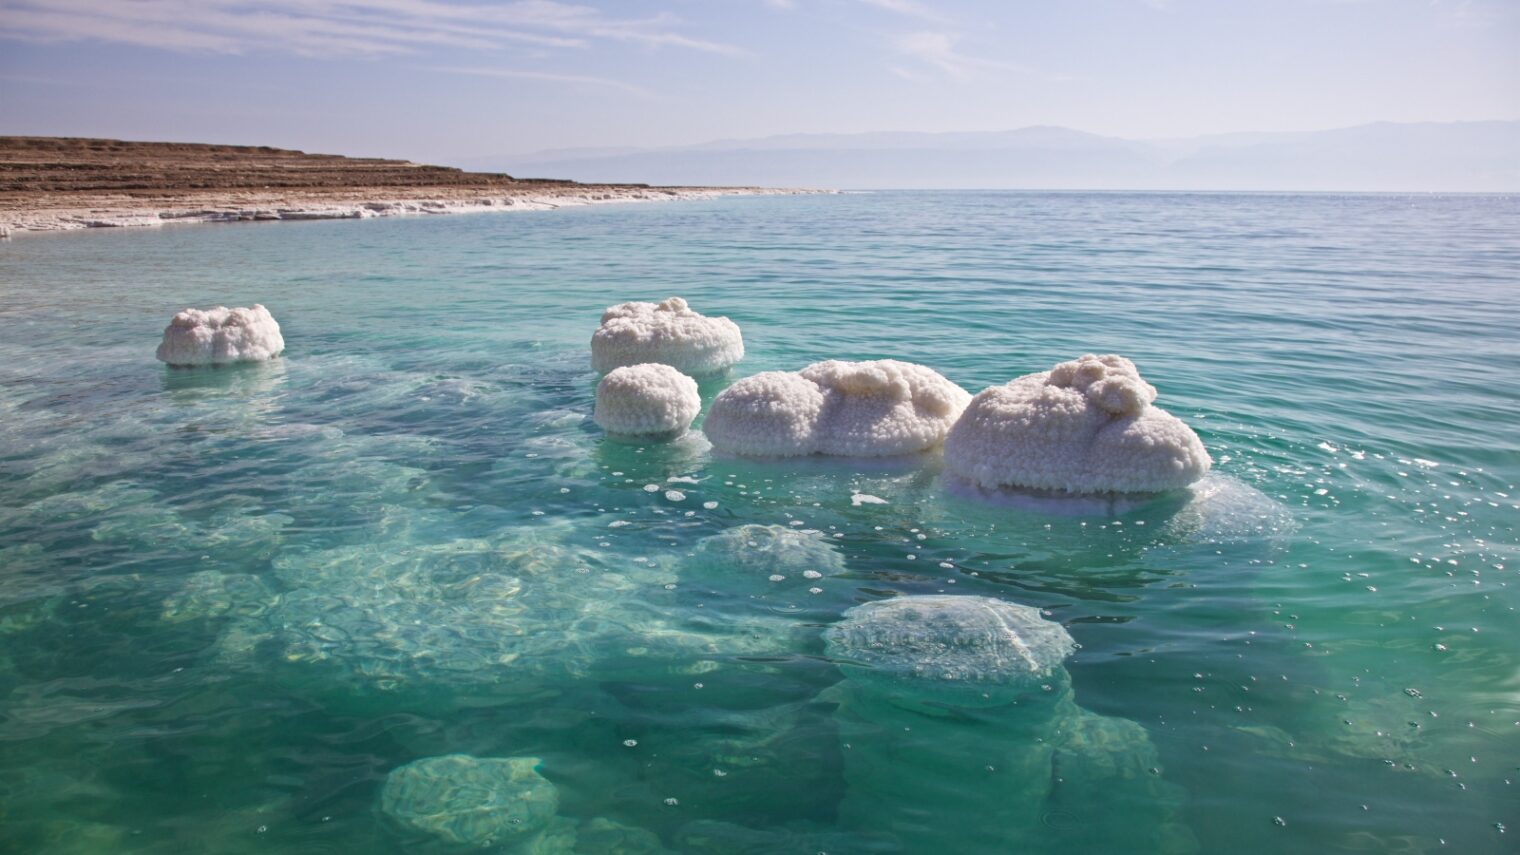 View of salt formations on the Dead Sea shore. Photo by Doron Horowitz/FLASH90